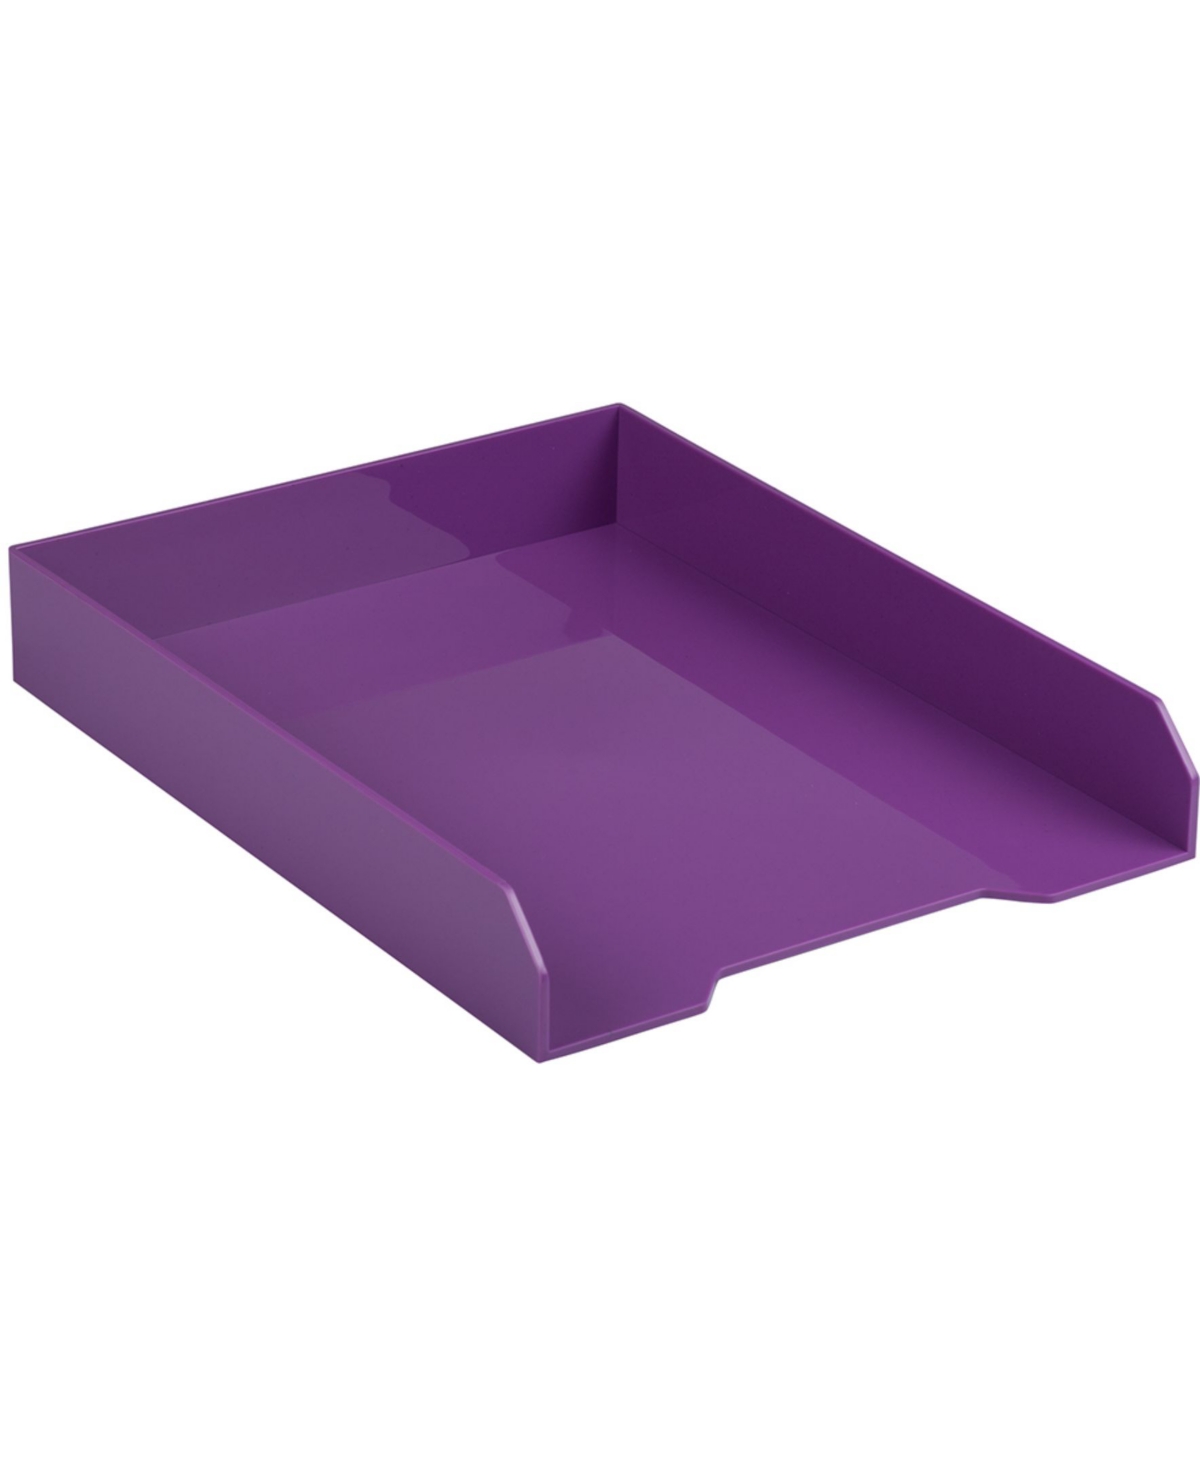 Stackable Paper Trays - Desktop Document, Letter, File Organizer Tray - Sold Individually - Purple